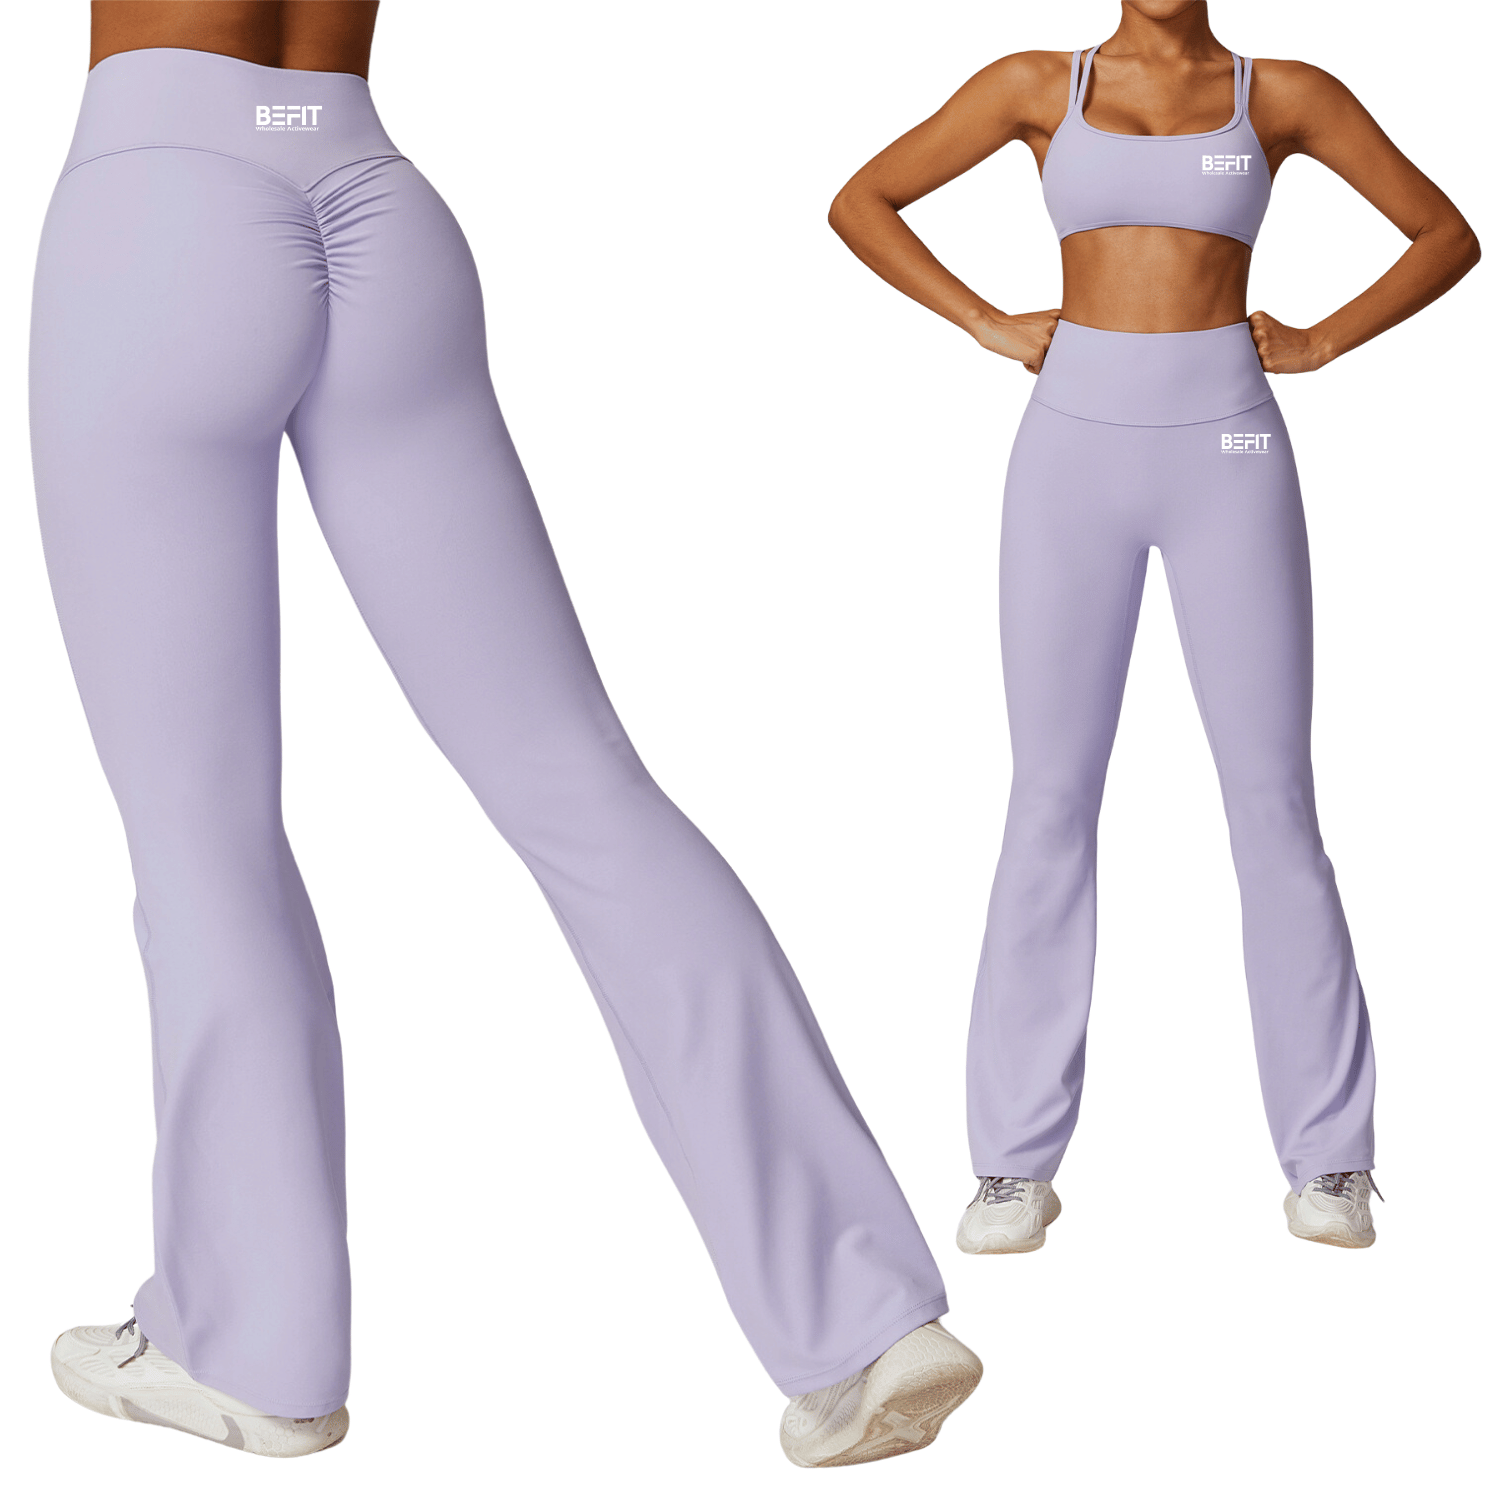 Women's Wholesale Tight-Fitting Pants